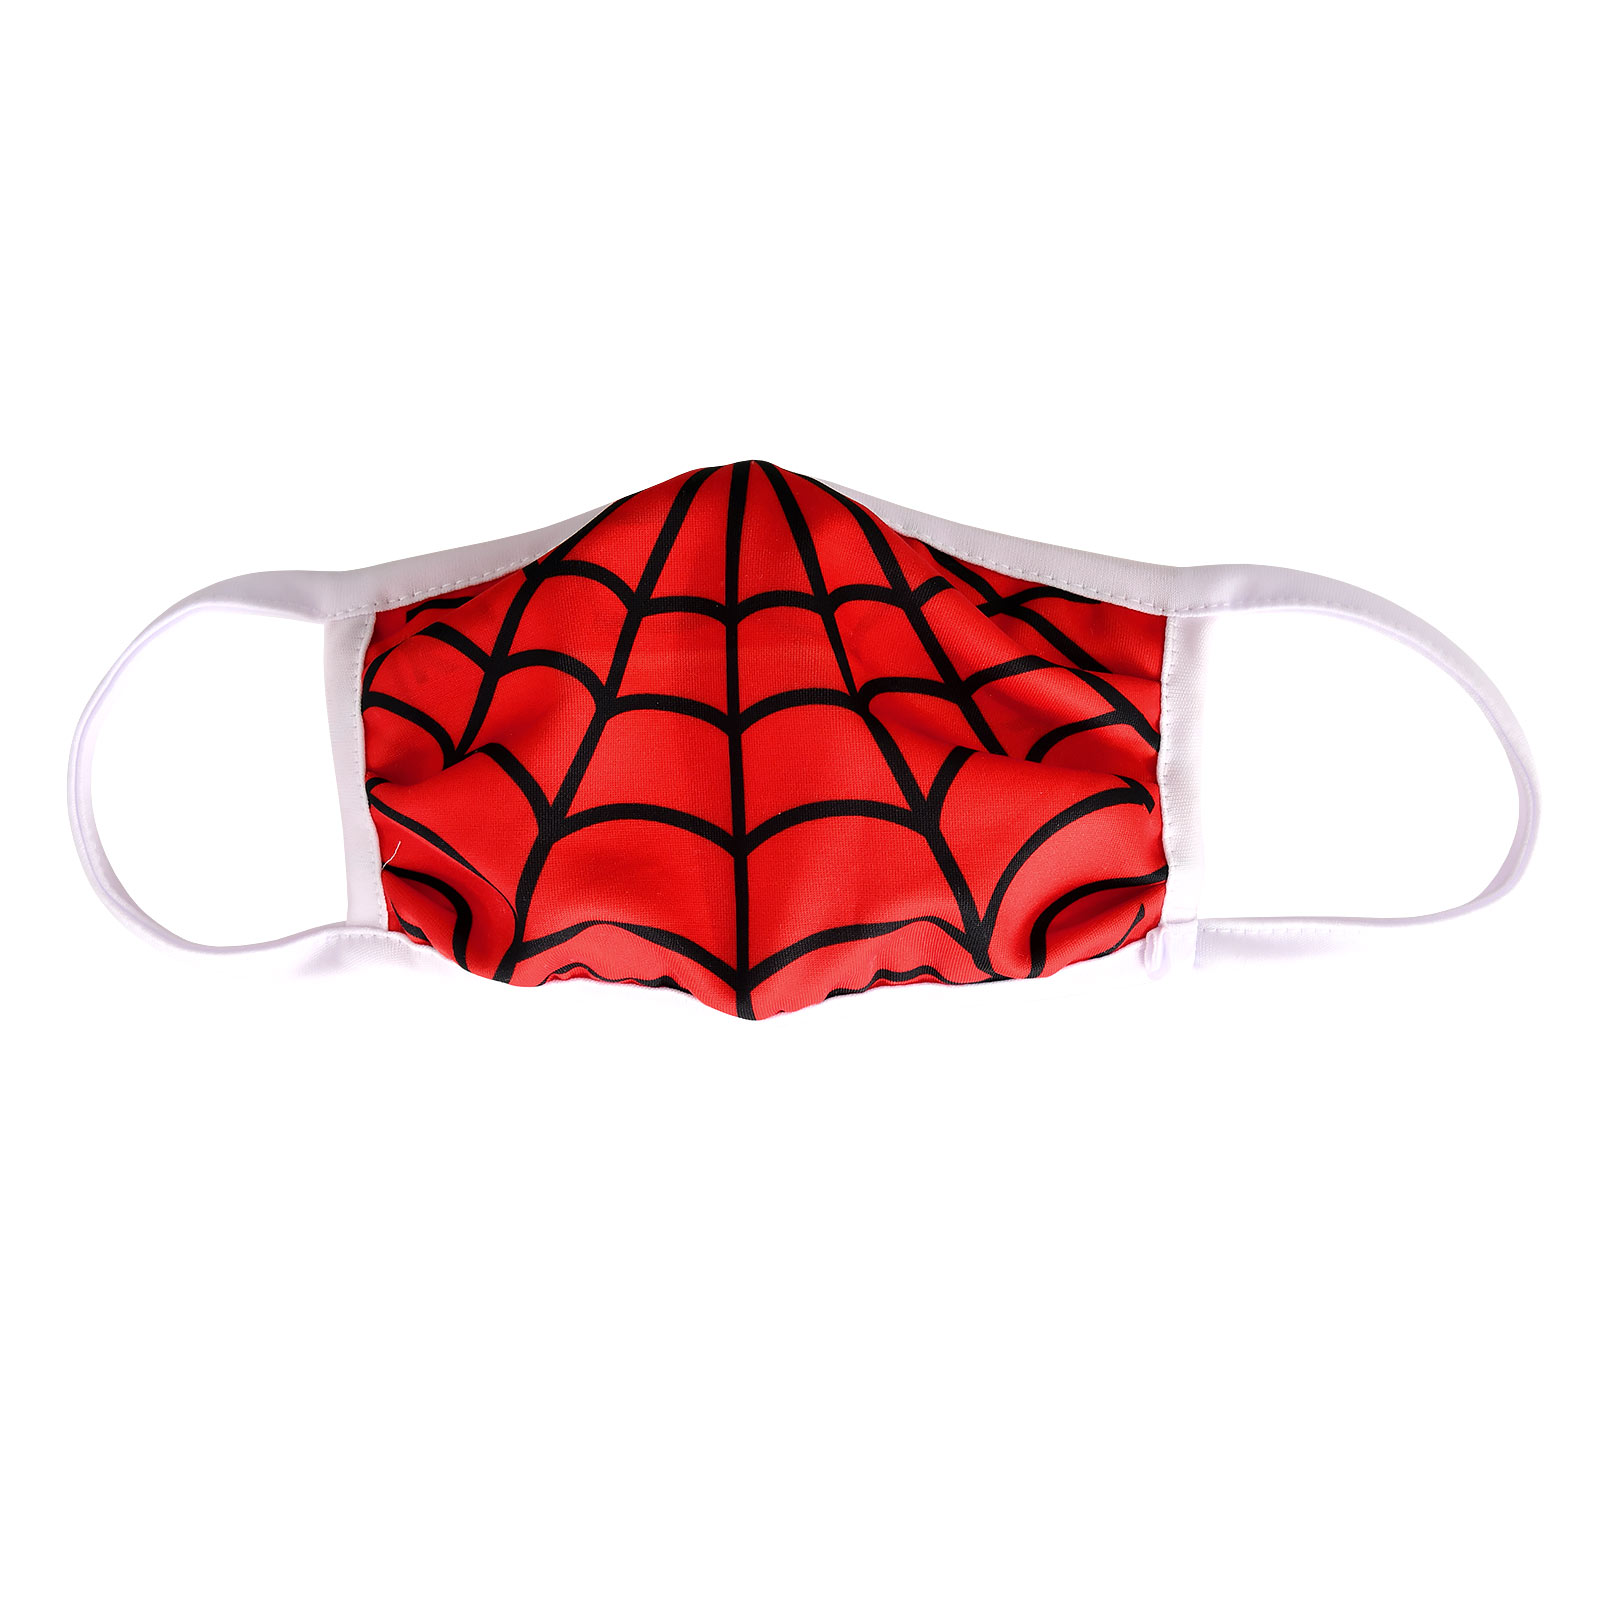 Spiderweb Face Mask for Spider-Man Fans